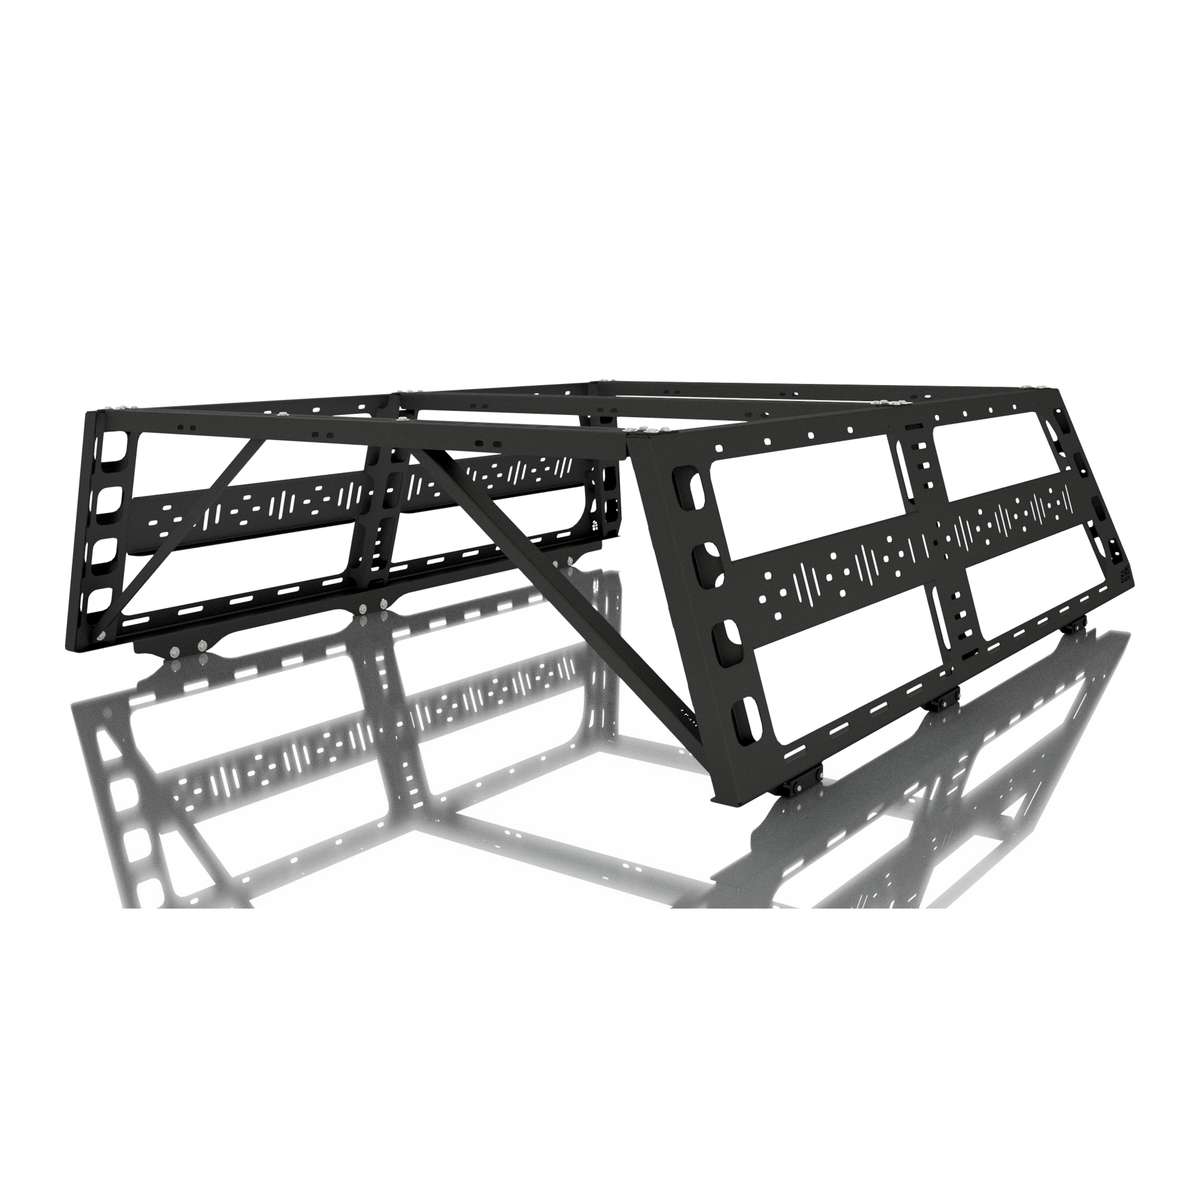 CBI Ford (Raptor/F150) Cab Height 5’6” Bed Rack (2010-2021)-Rooftop Tents USA